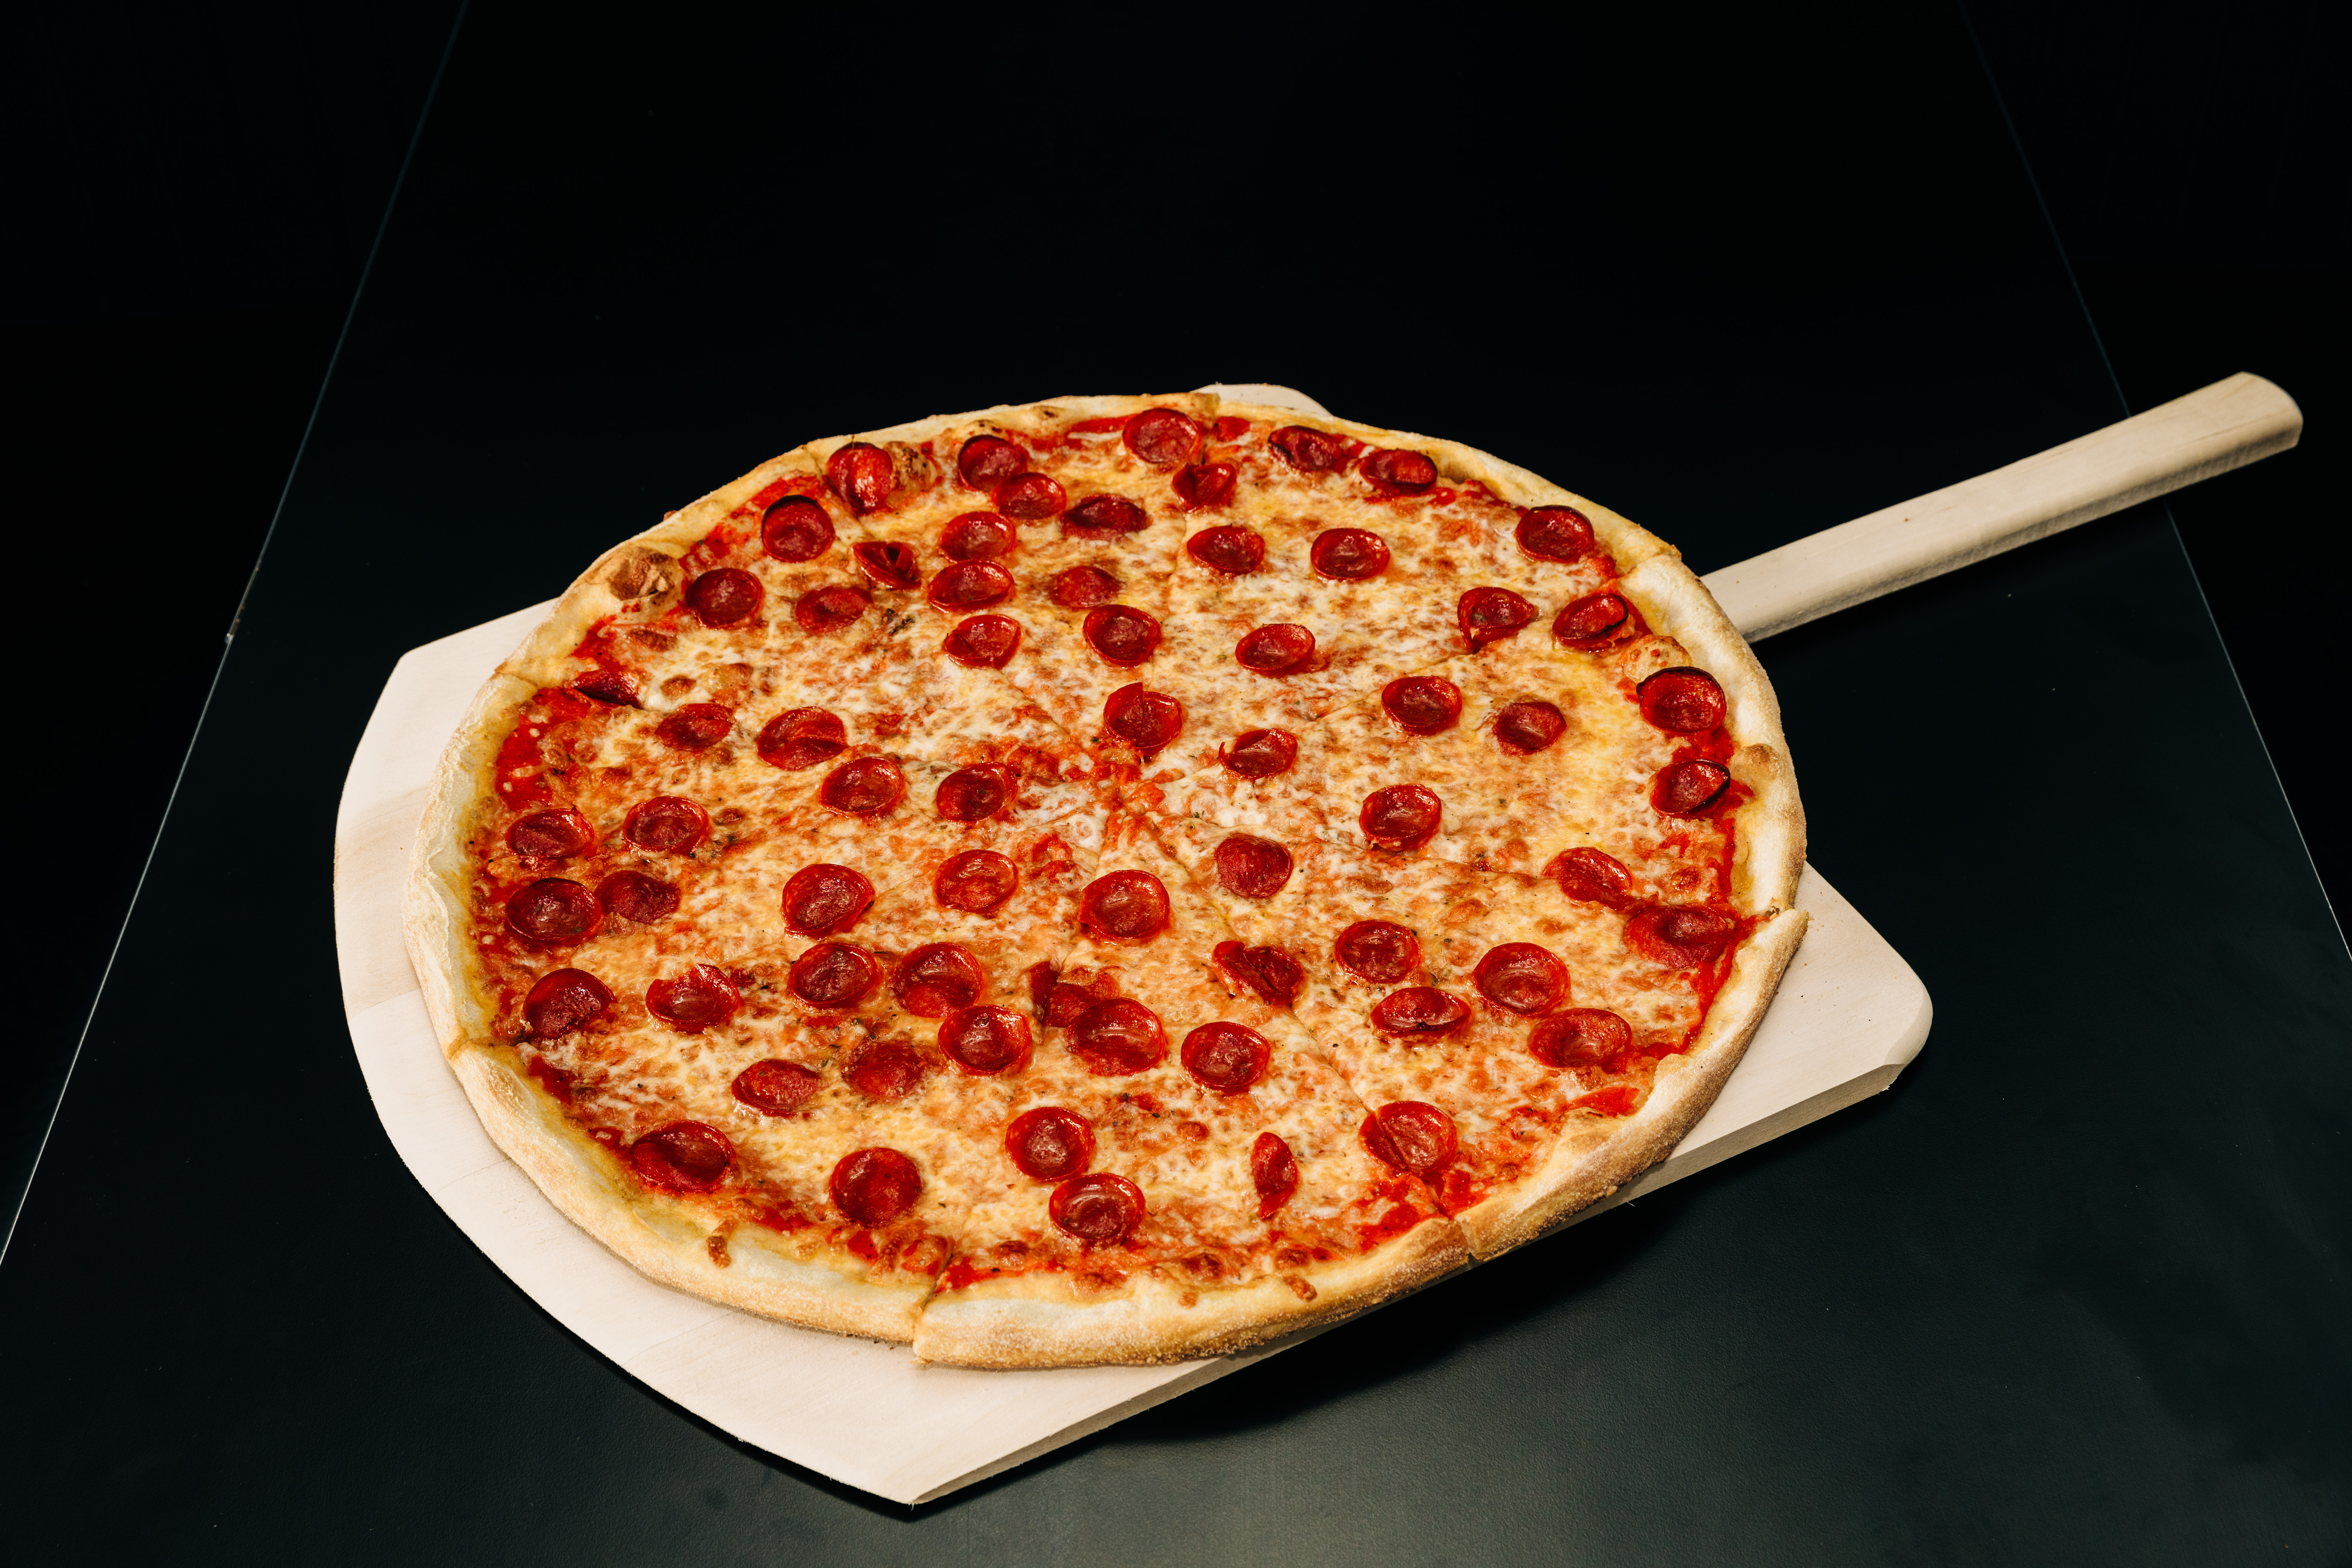 A pepperoni pizza on a wooden pizza peel is visible against a black background.